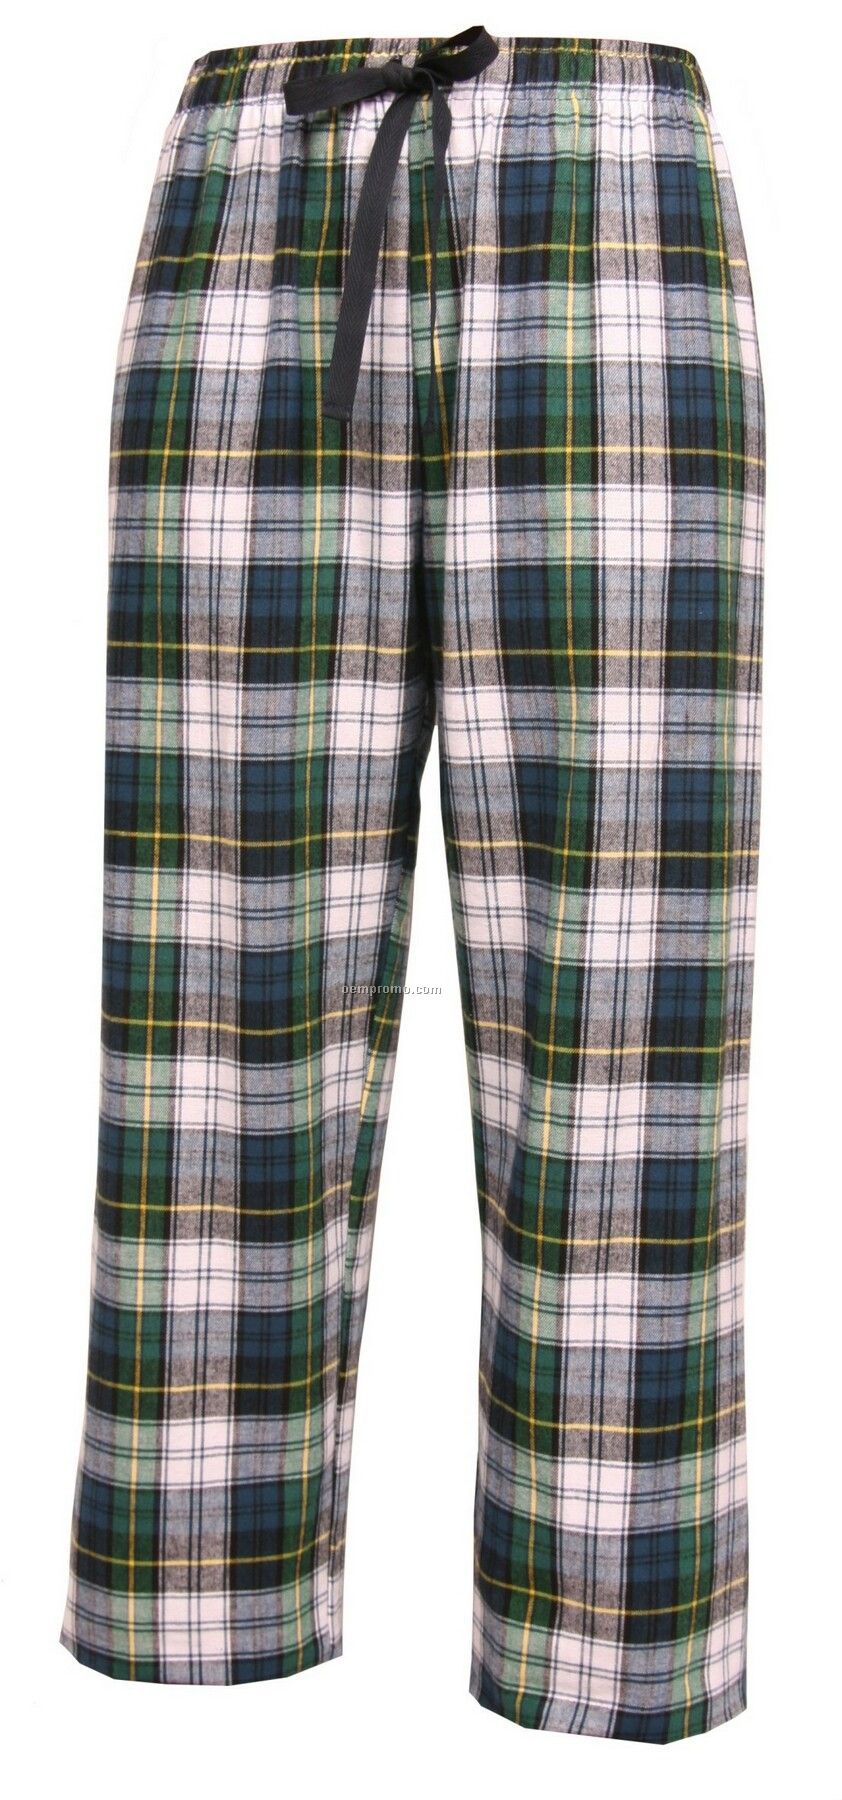 Youth Campbell Plaid Fashion Flannel Pant With Tie Cord